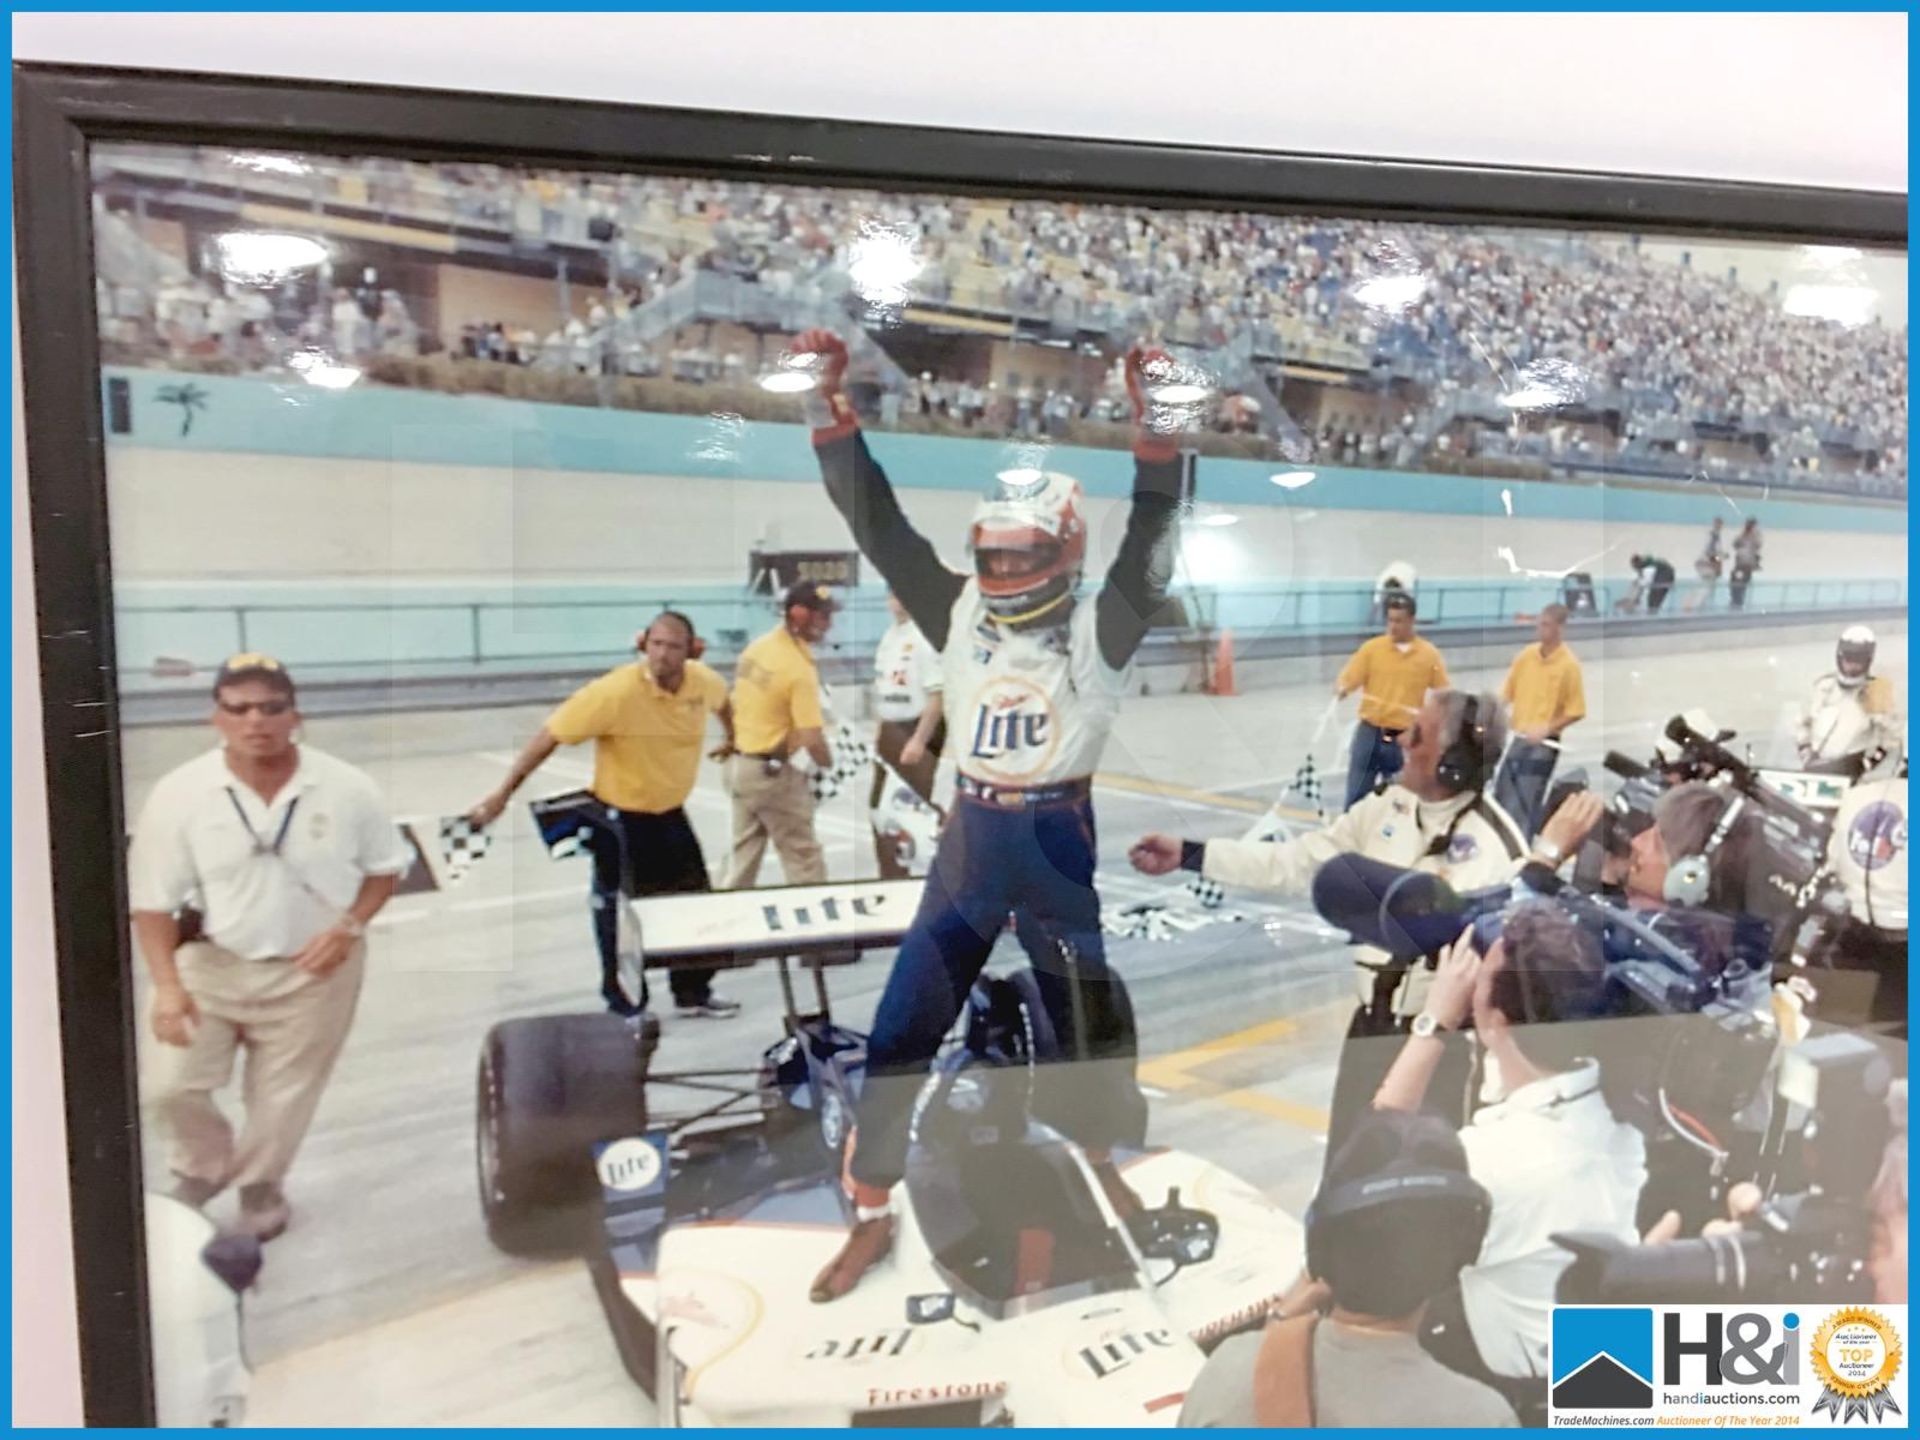 Framed photograph of Indycar race winner. Picture has minor damage. Appx 27in x 18in. From the Coswo - Image 3 of 3